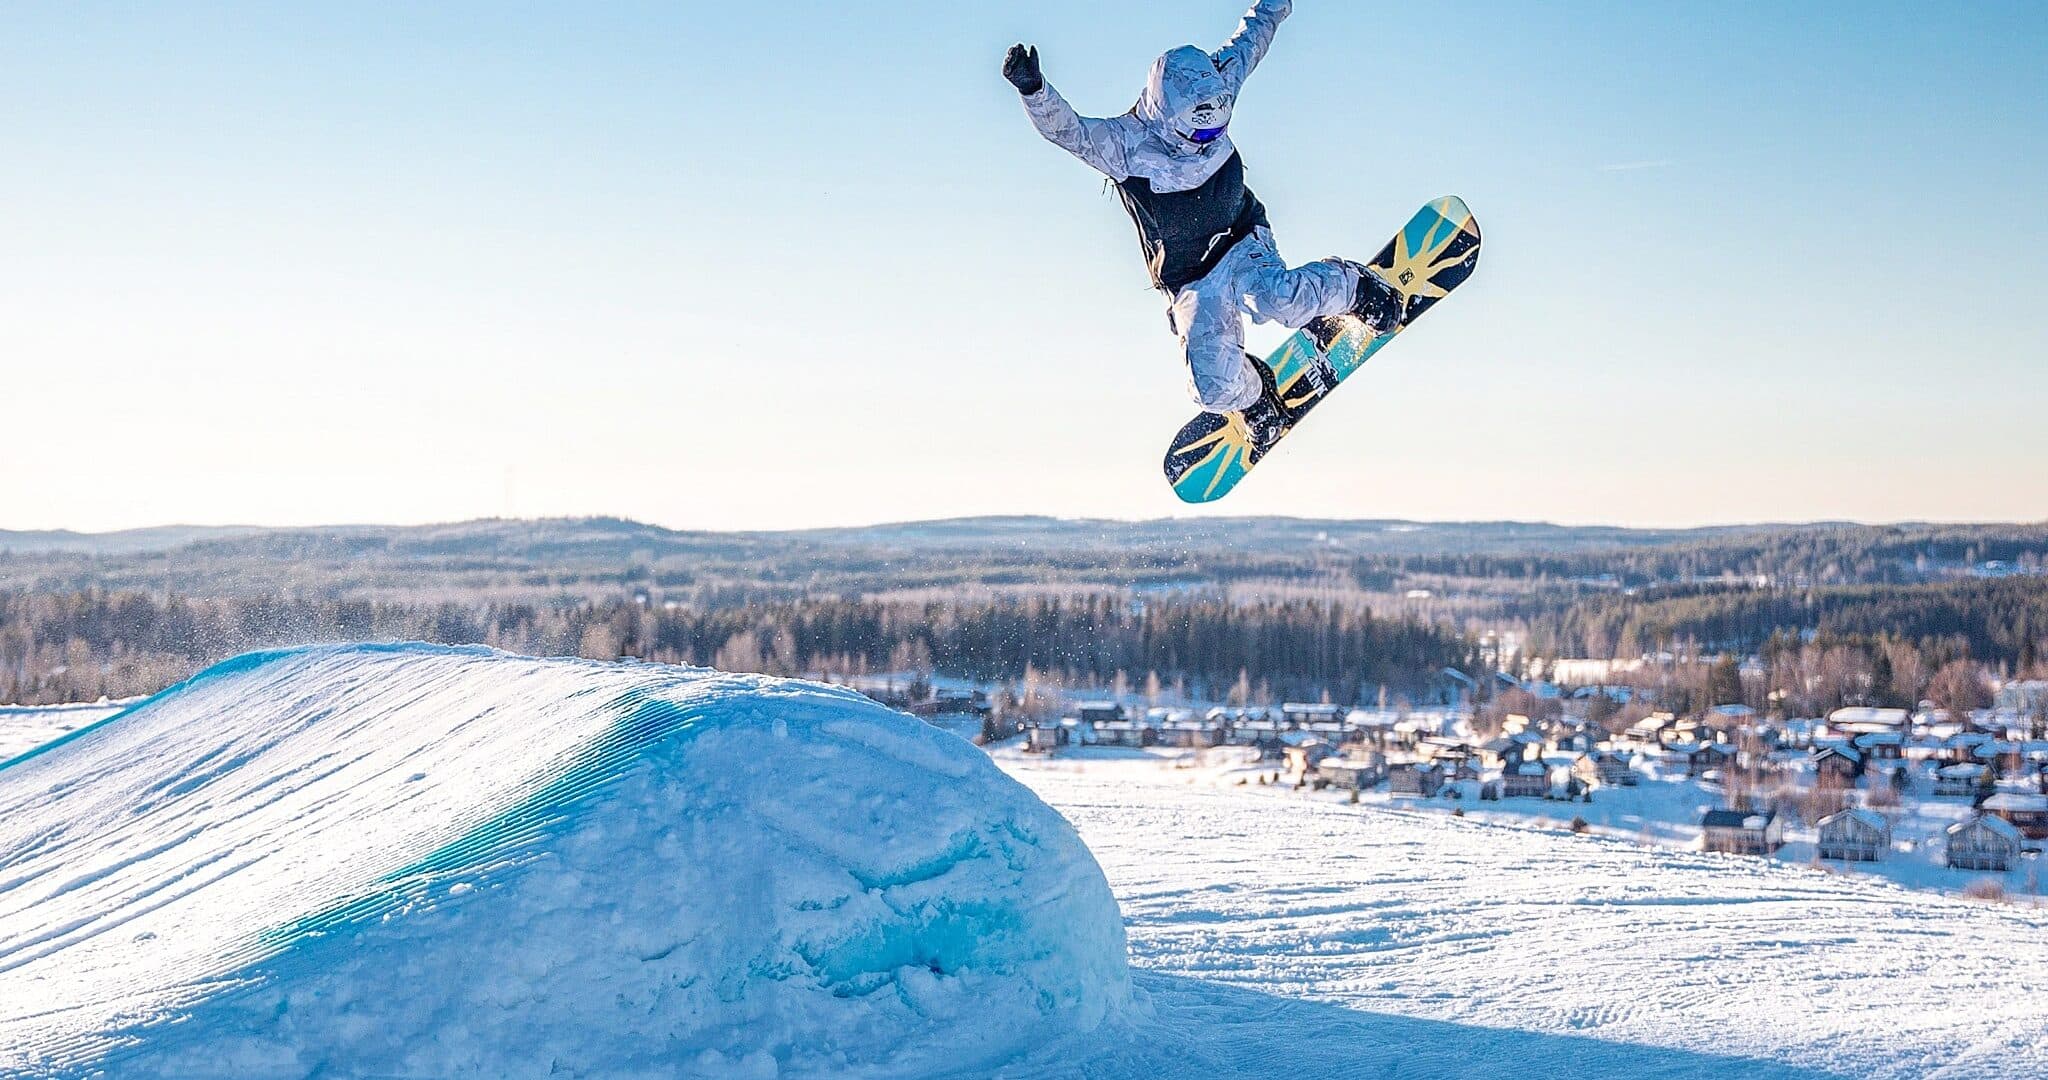 snowboarding in bright winter weather in Finland